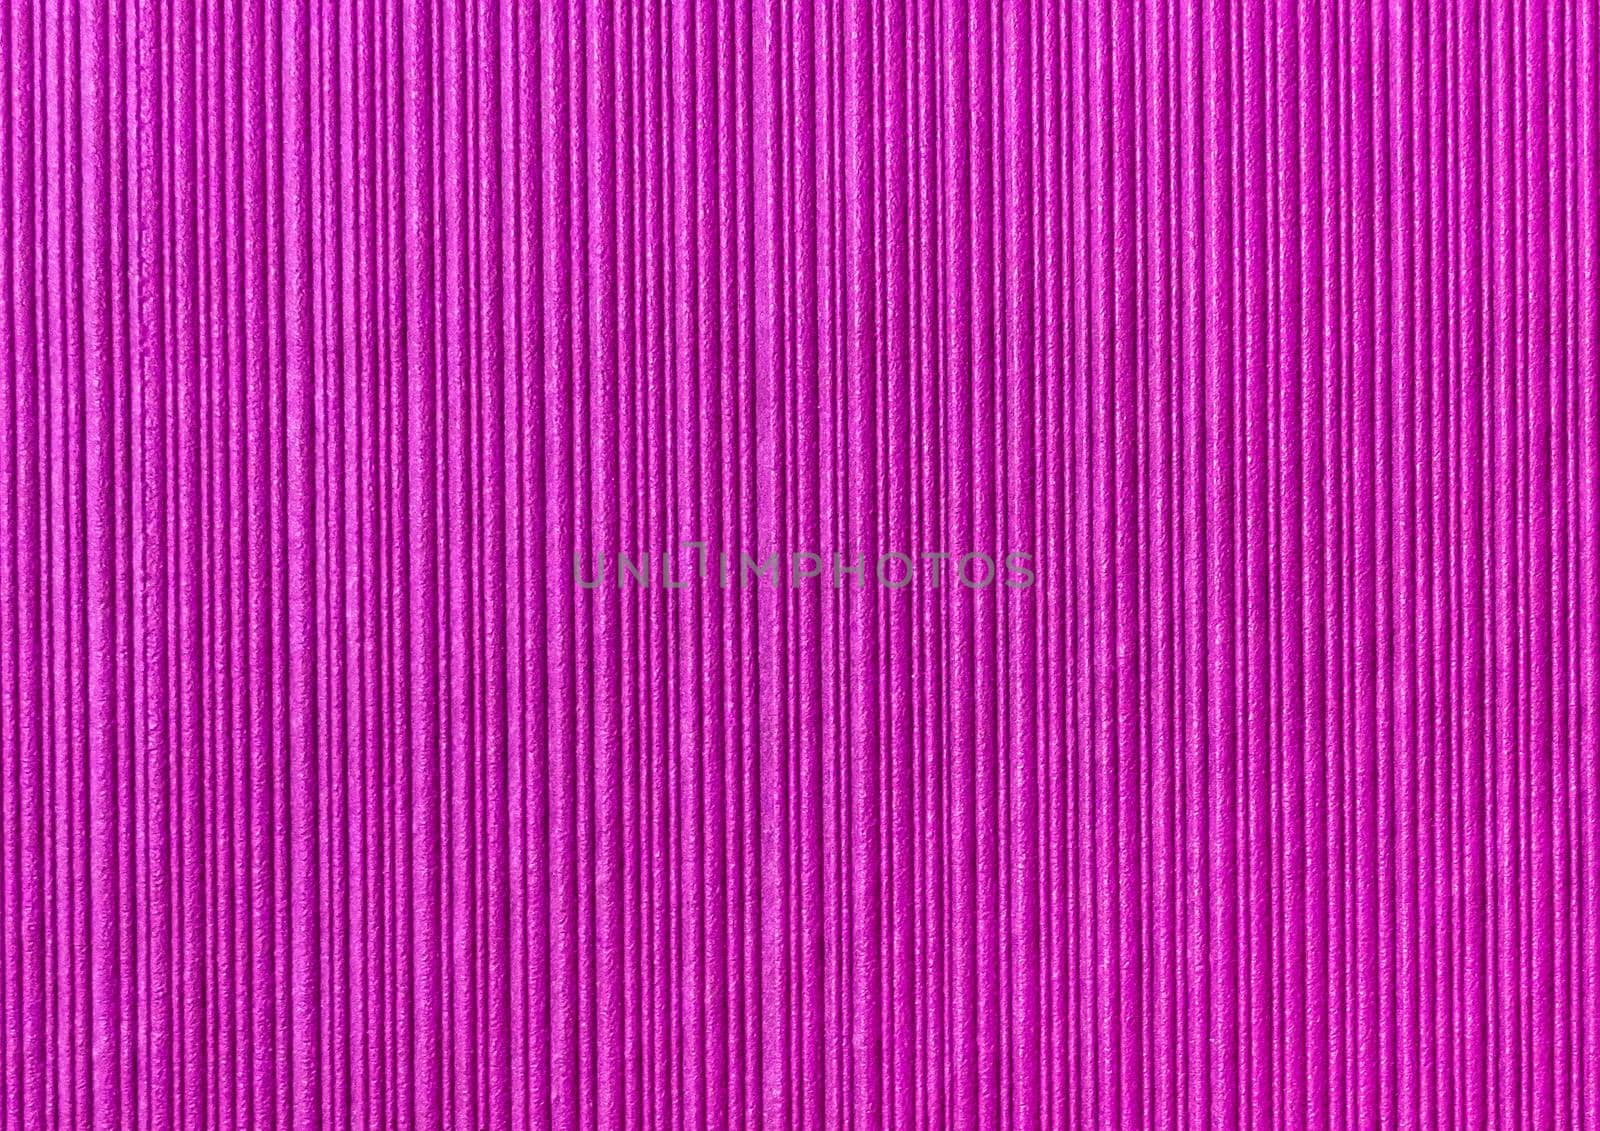 Pink abstract striped pattern wallpaper background, violet paper texture with vertical lines by AYDO8